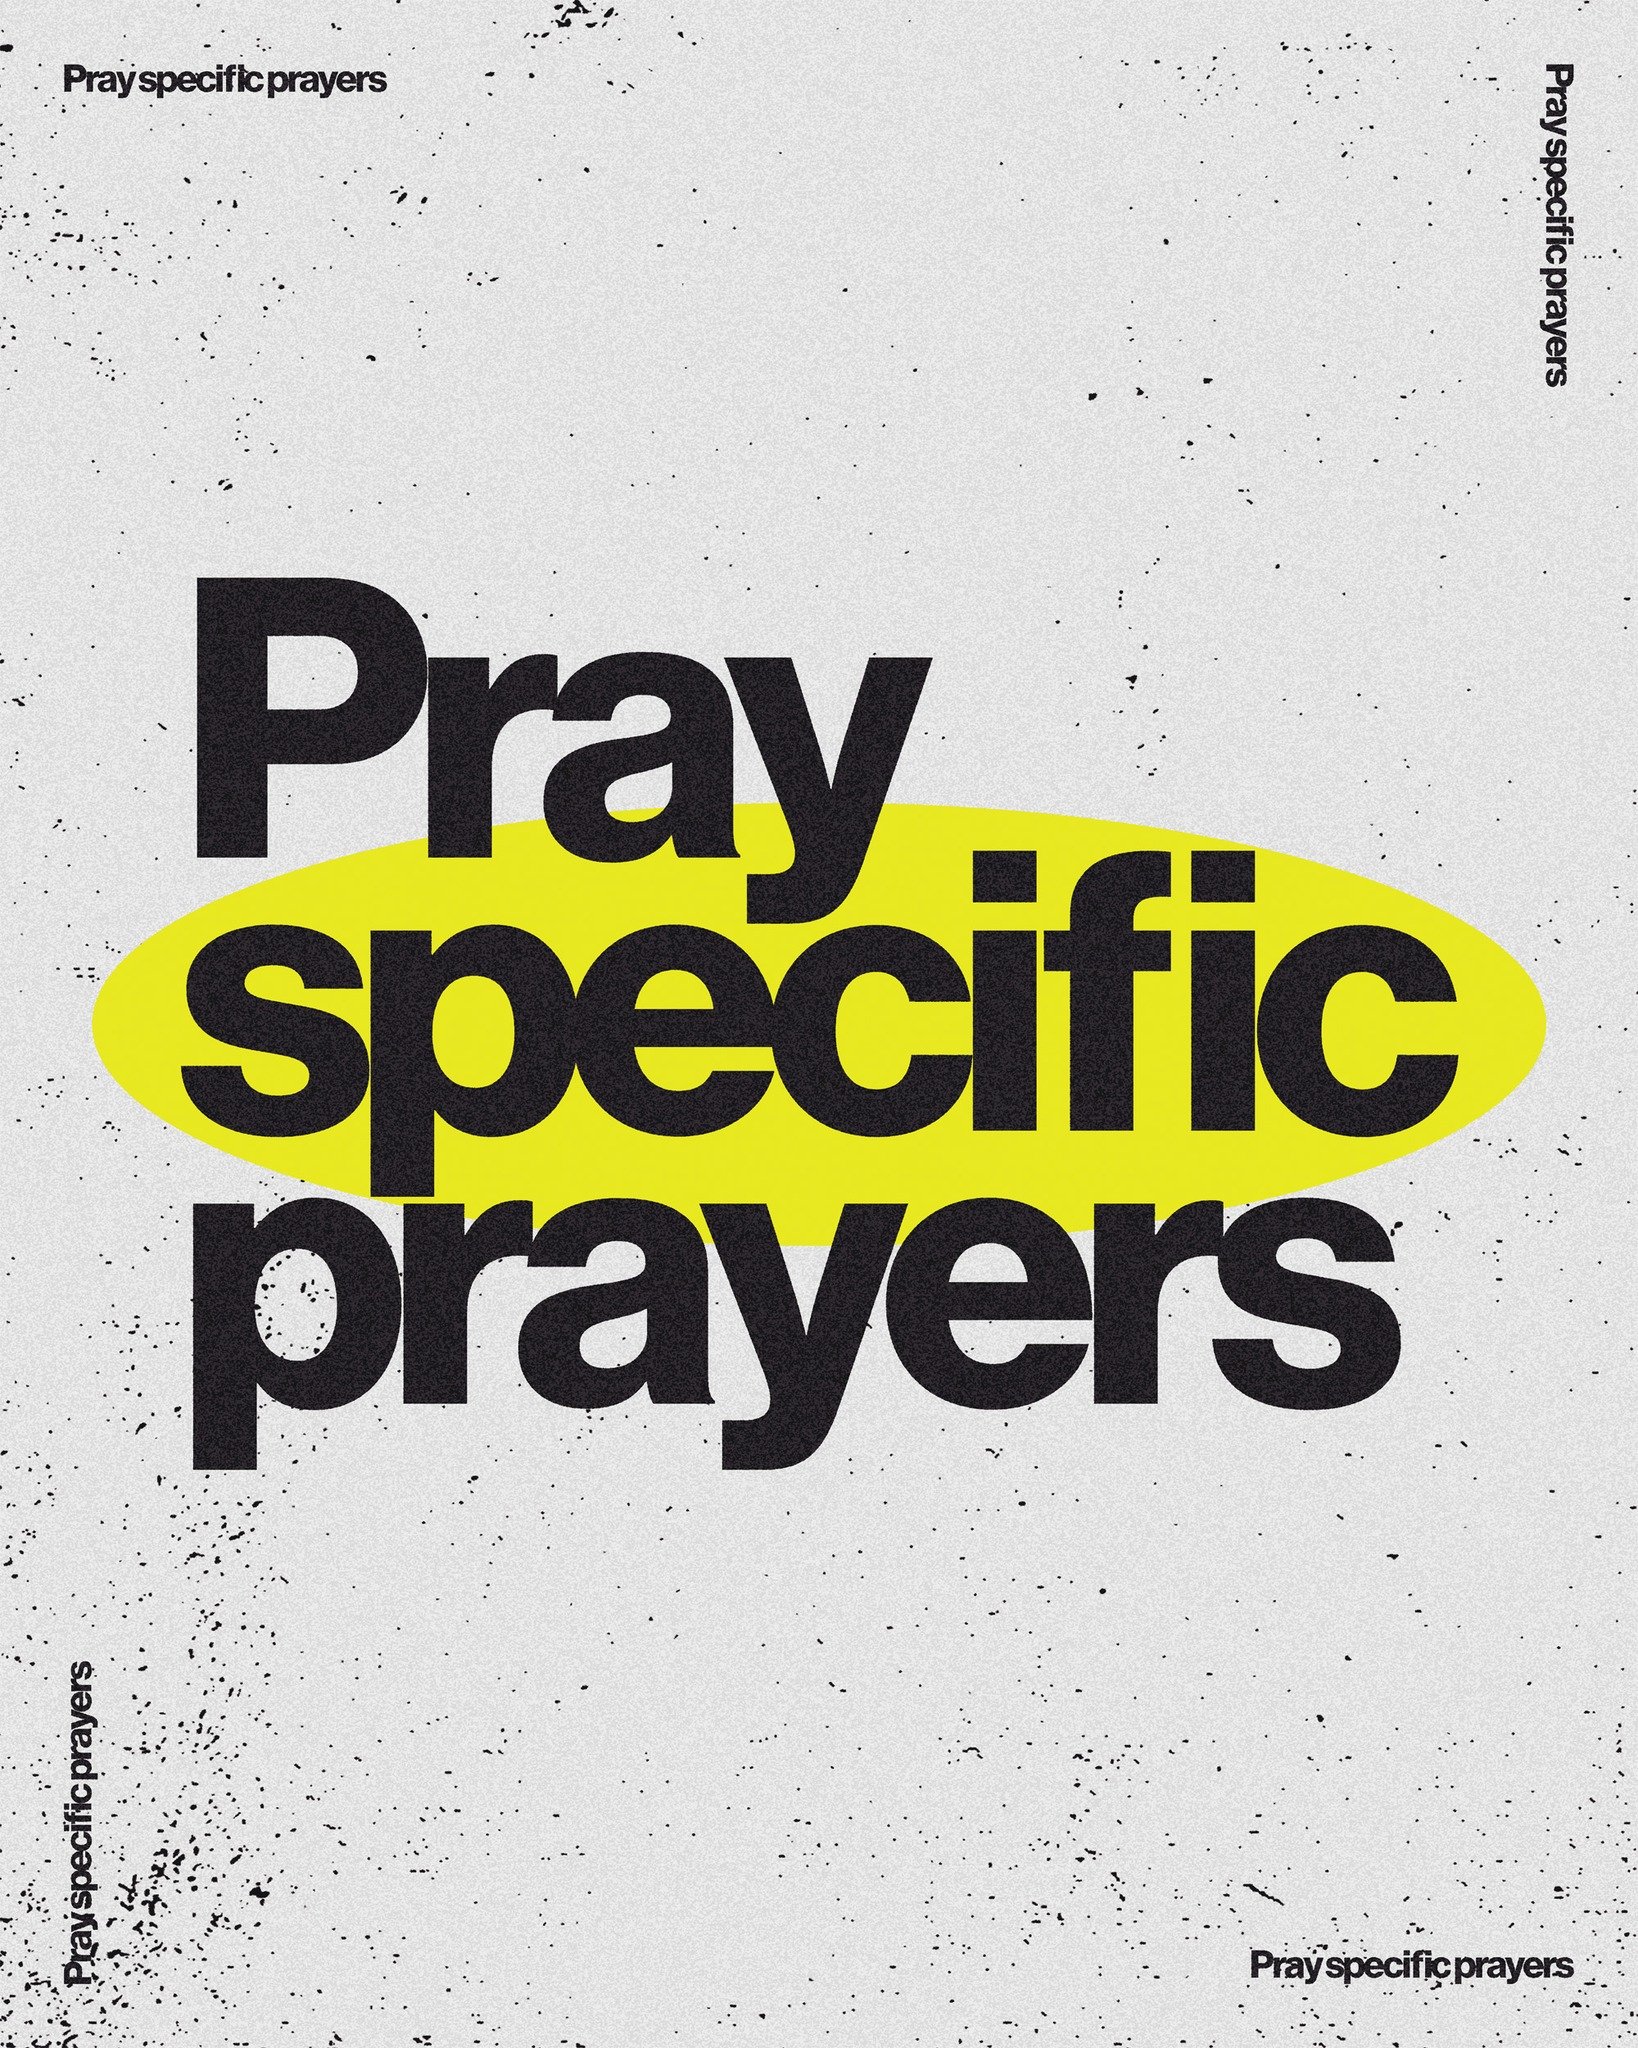 Specific prayers demonstrate our faith and trust in God's ability to work in intricate details of our lives.